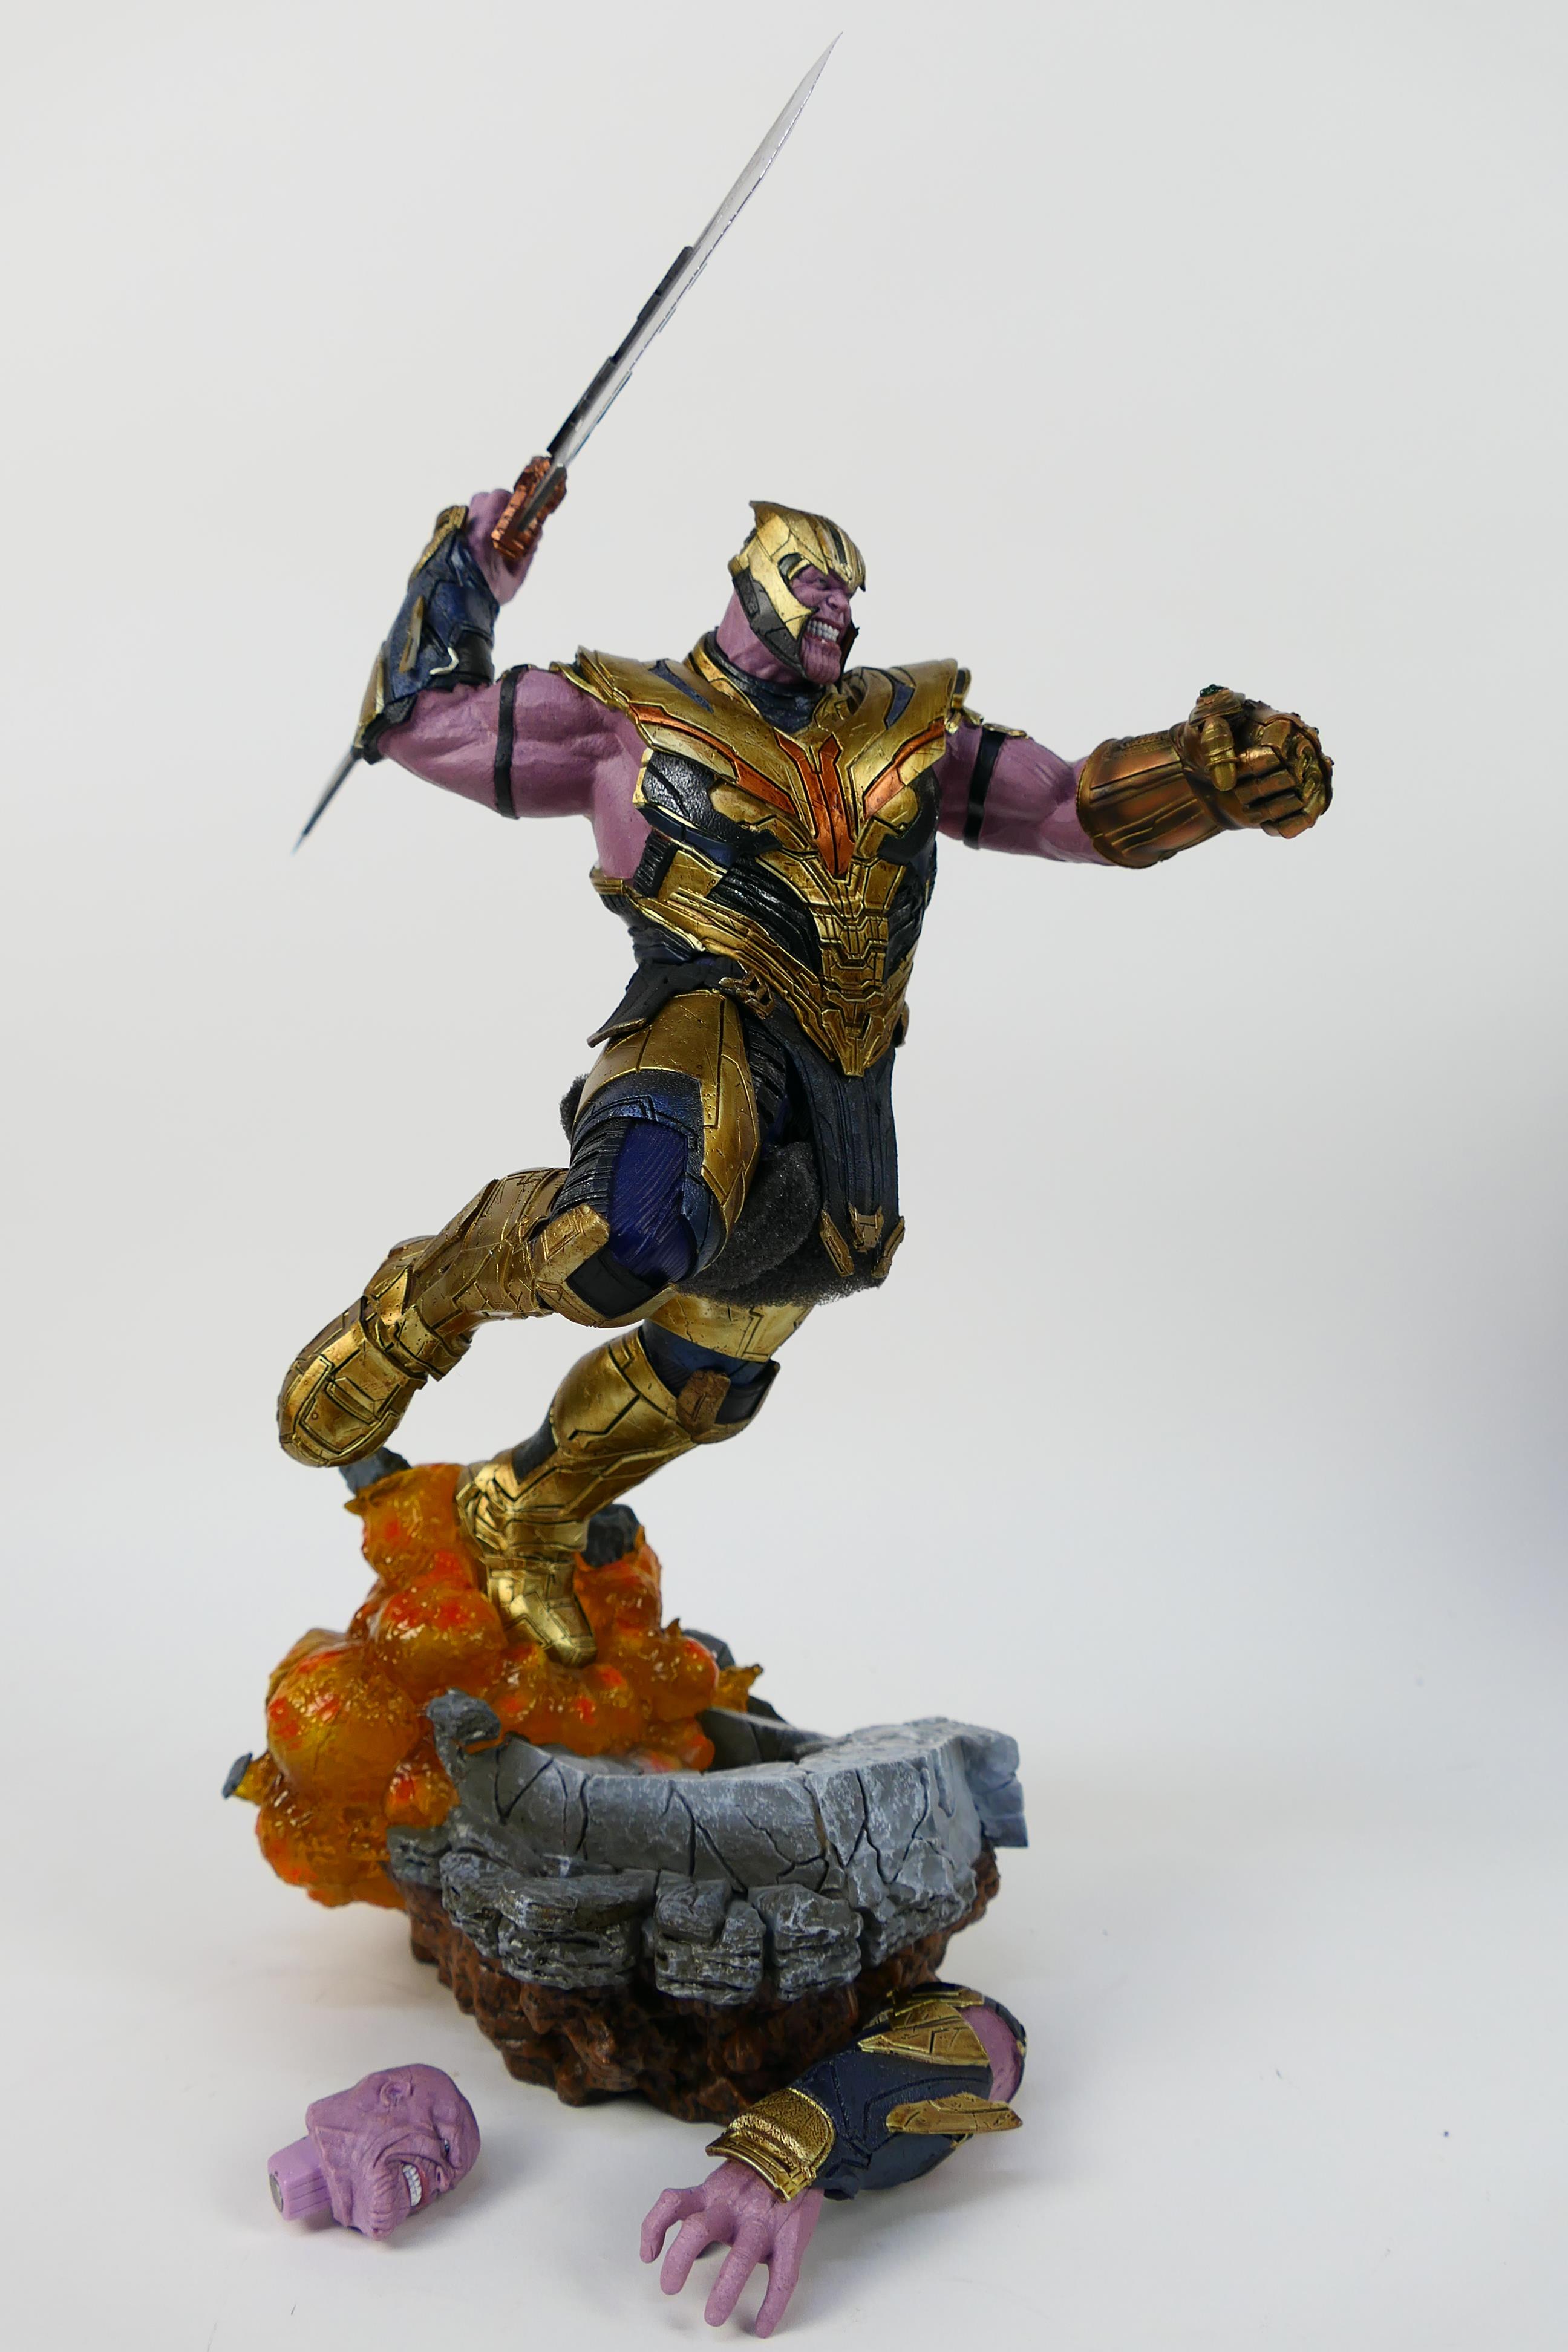 Marvel - Iron Studios - A limited edition BDS Deluxe Avengers Endgame Thanos statue in 1/10 scale. - Image 2 of 8